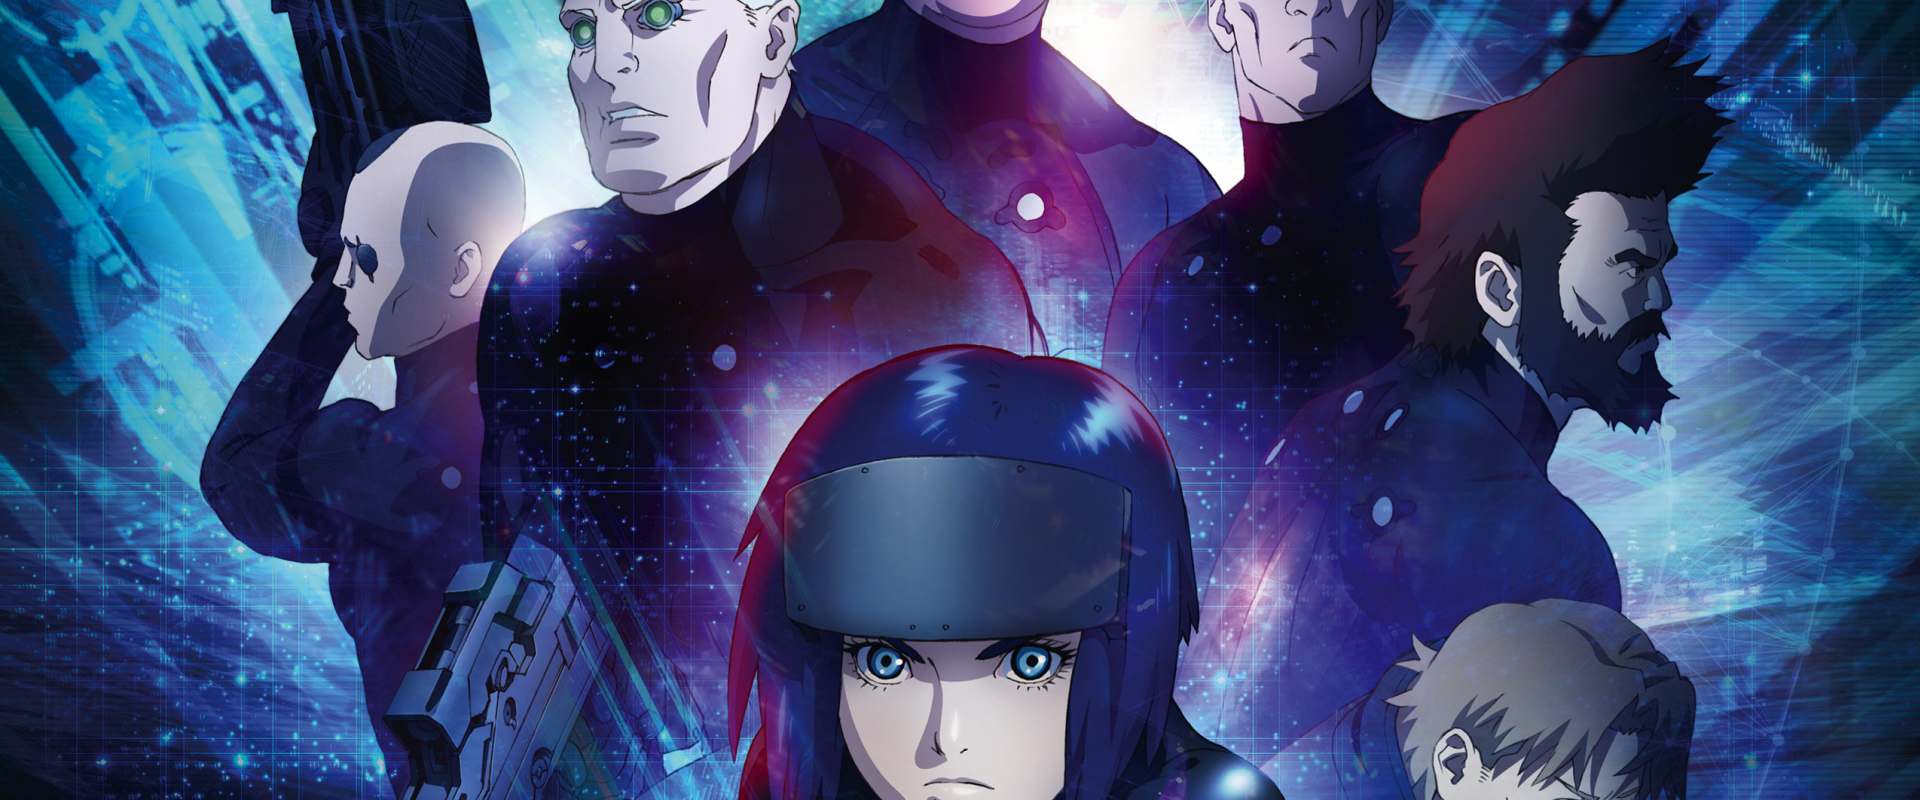 Ghost In The Shell: The New Movie background 2